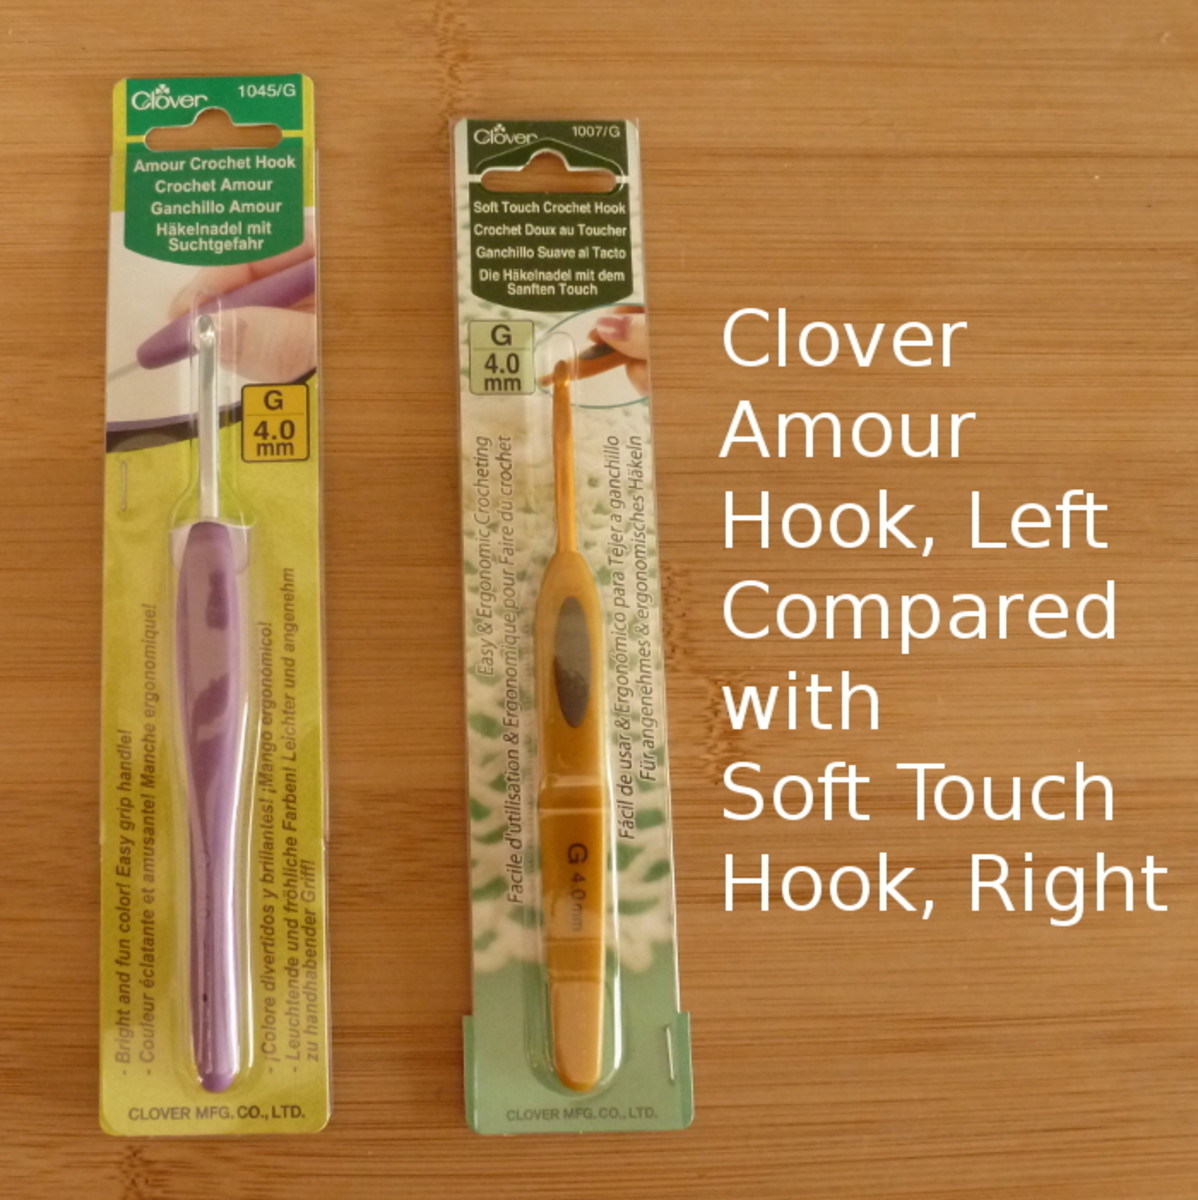 Clover Amour Hook shown next to the Soft Touch for visual comparison.